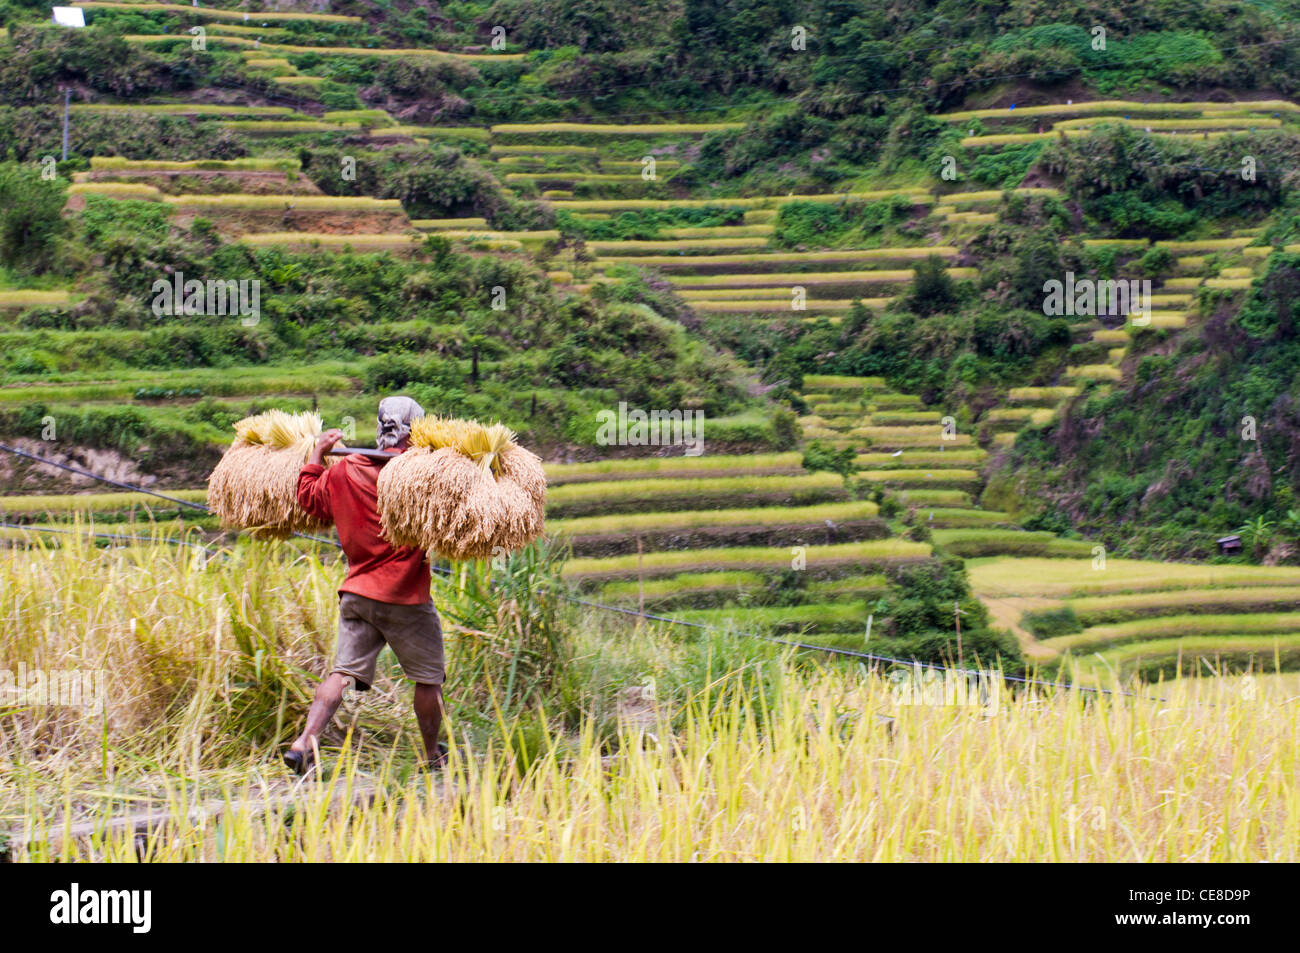 farmers are carrying bundles of harvested rice over shoulder, in philippines Stock Photo